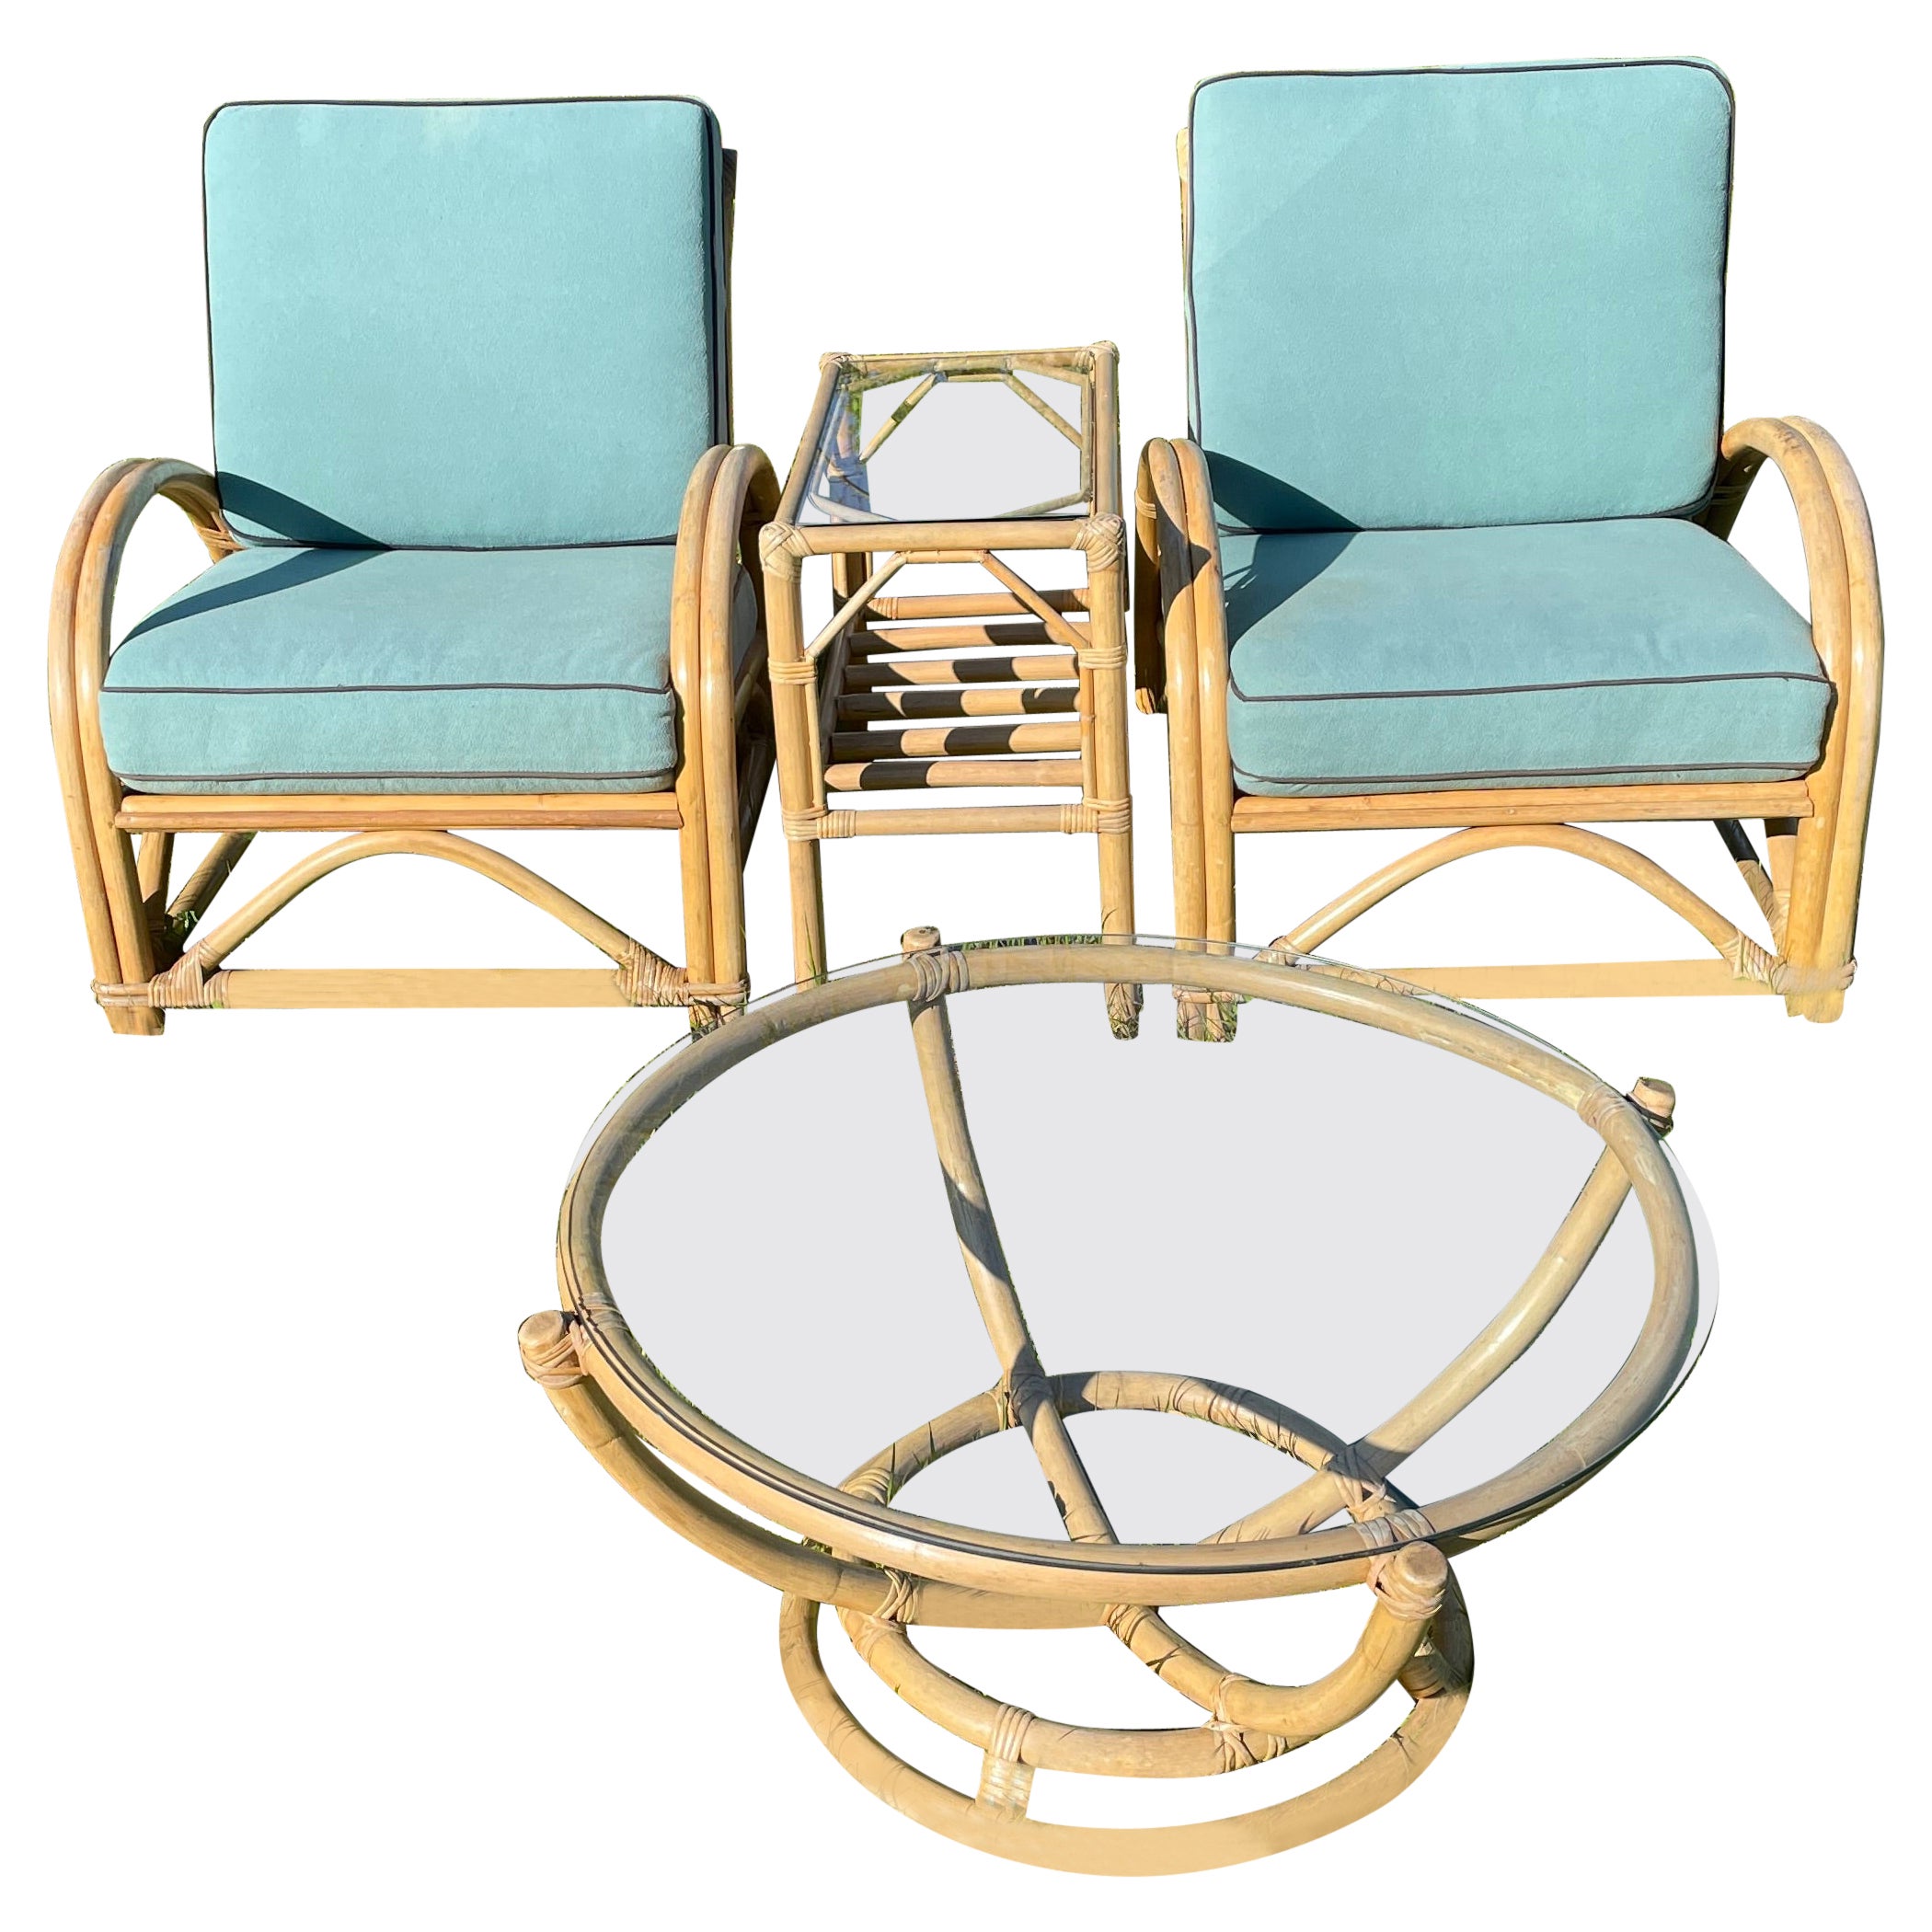 1970s Bentwood Bamboo Patio Furniture, Pair of Lounge Chairs and Table Set of 4 For Sale